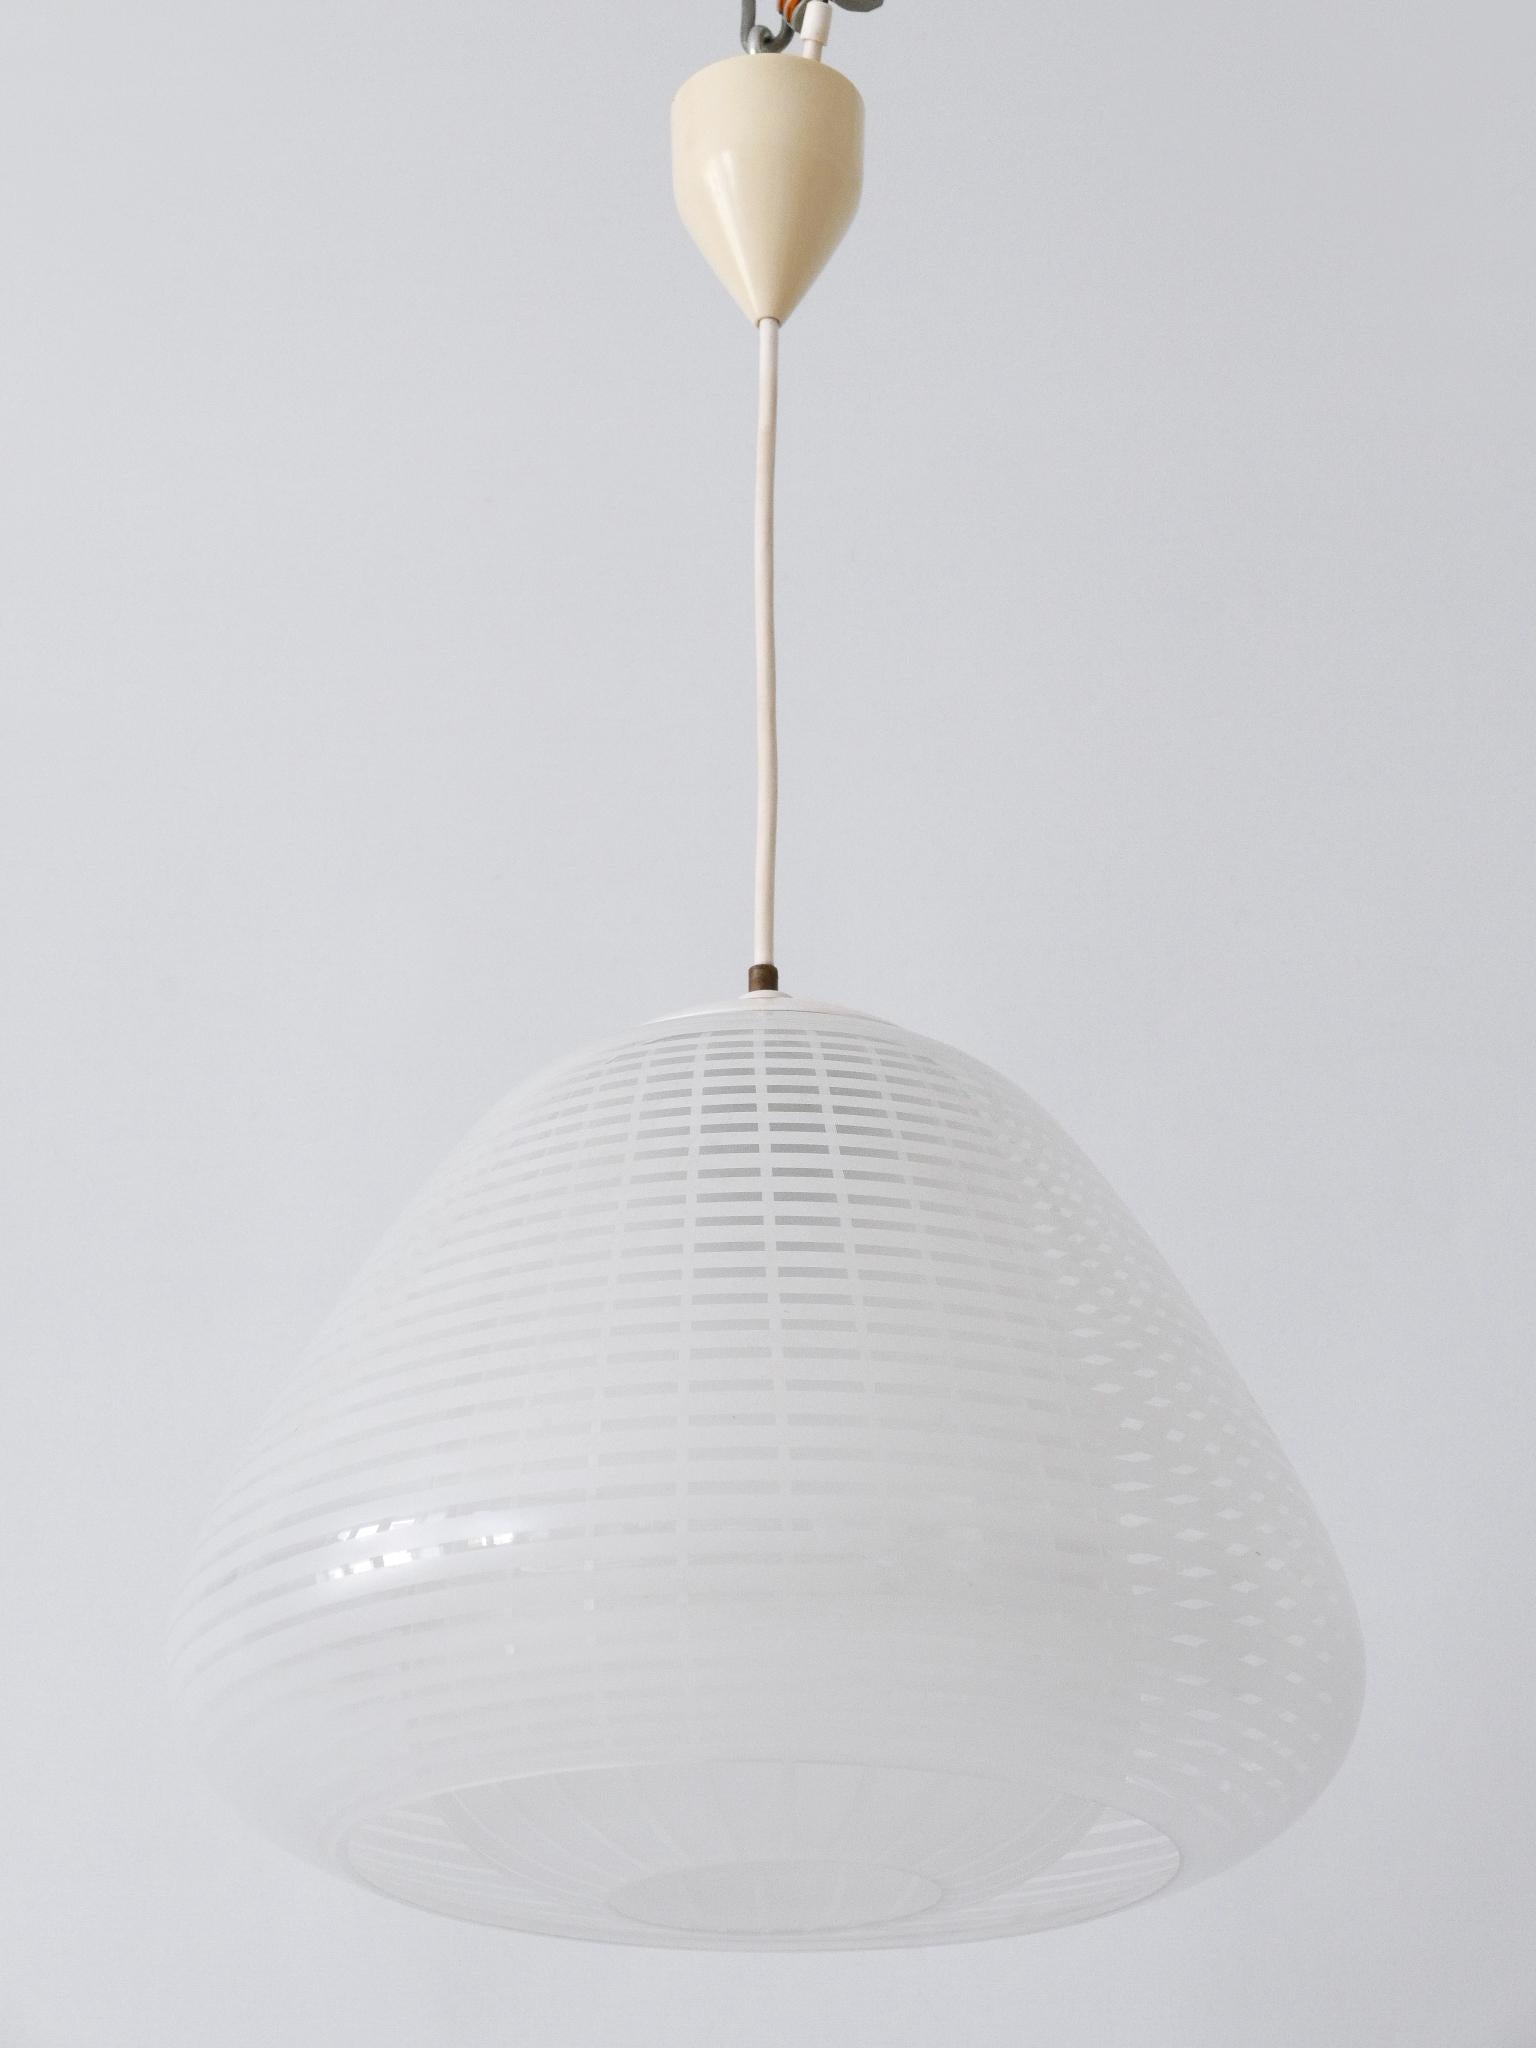 Rare, elegant and highly decorative Mid-Century Modern pendant lamp or hanging light. Model München / Munich. Designed by Wilhelm Wagenfeld in 1952. Manufactured by Peill & Putzler, Düren, Germany, 1950s.

Executed in clear glass with enameled